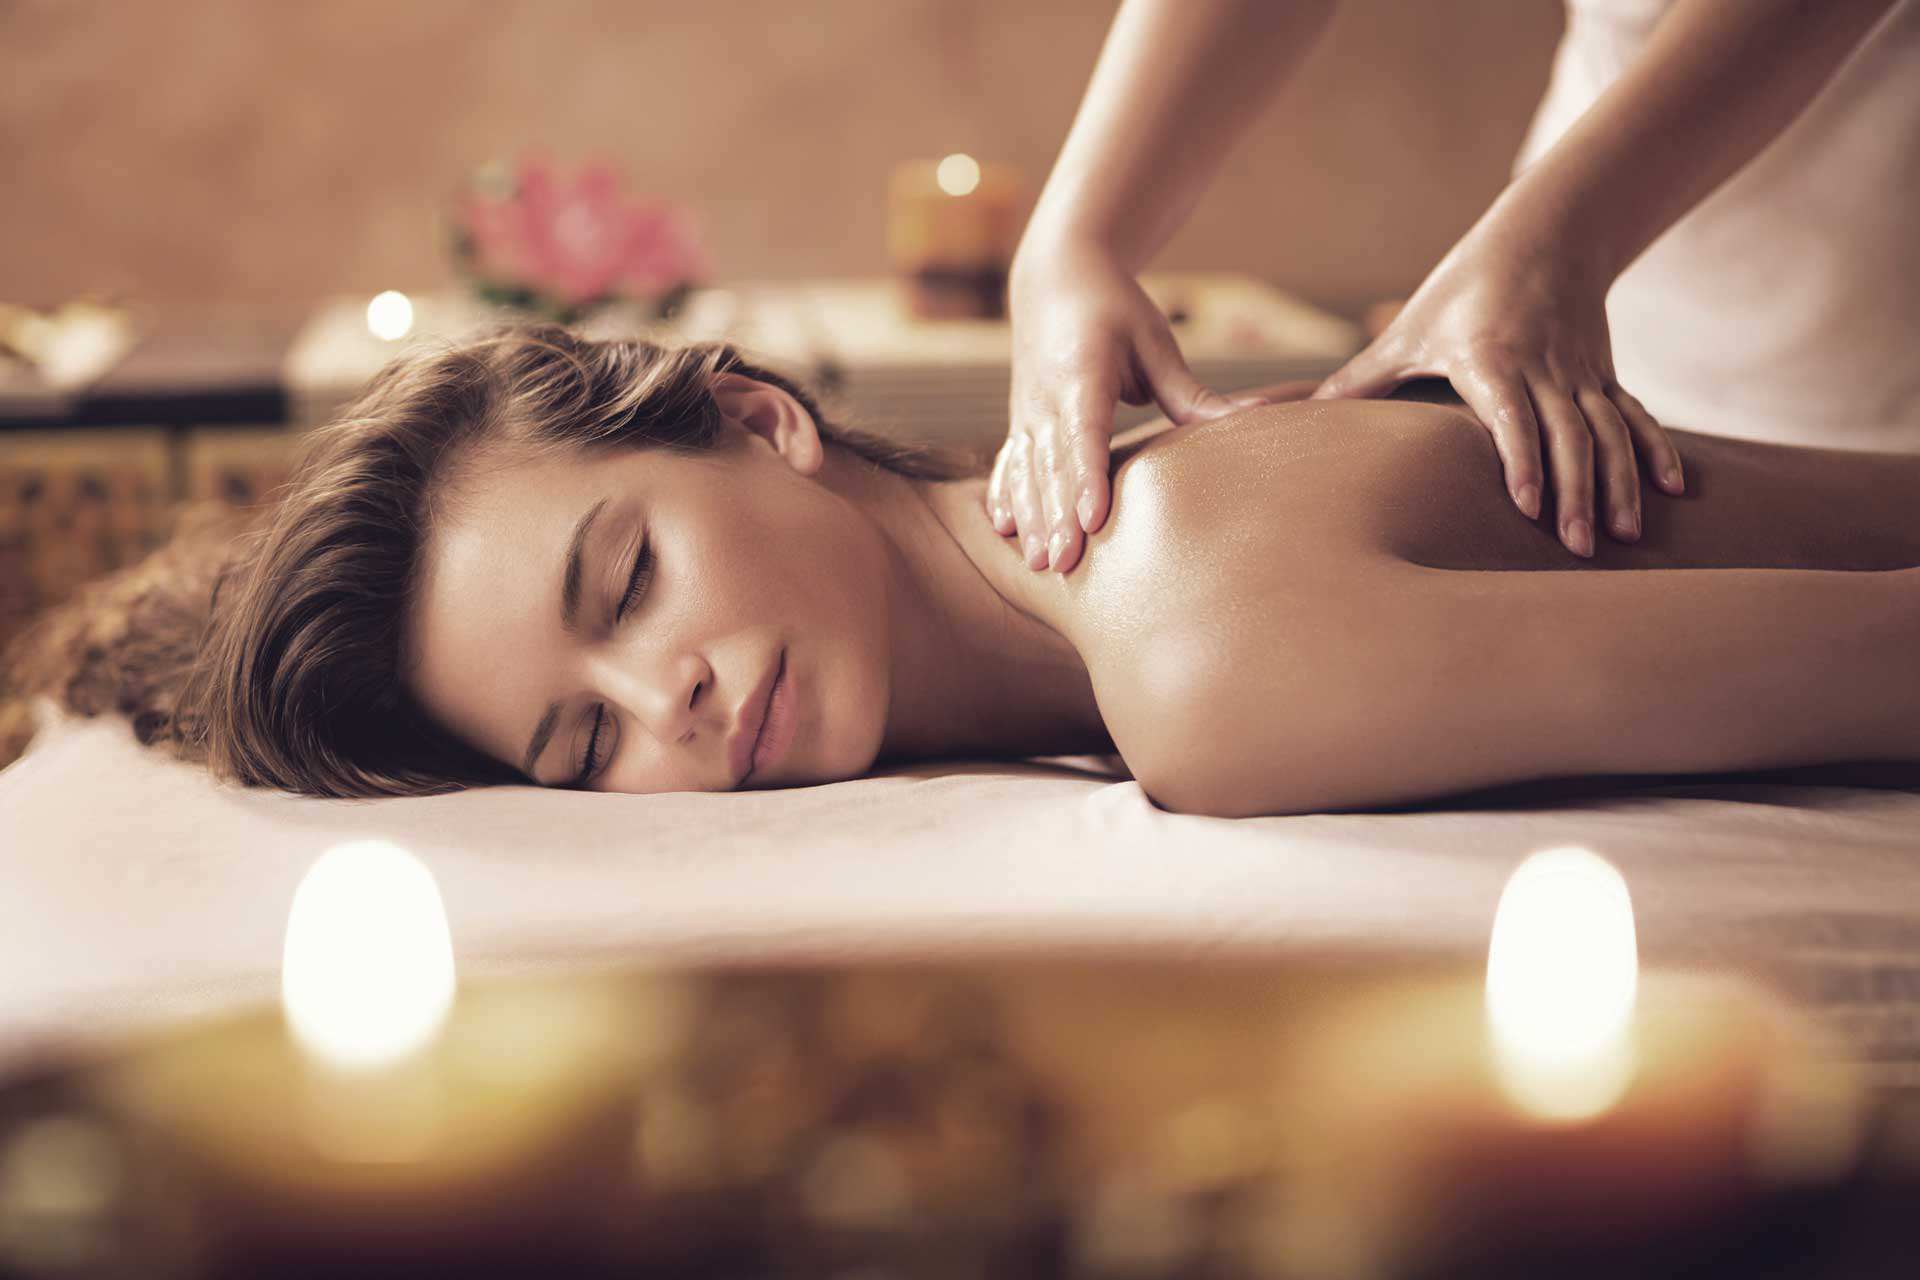 massage, massage treatments, Therapies ⋆ Charisma Massage Experiences. Massage Treatments. Top rated deep tissue, thai oil and relaxing massage in Athens